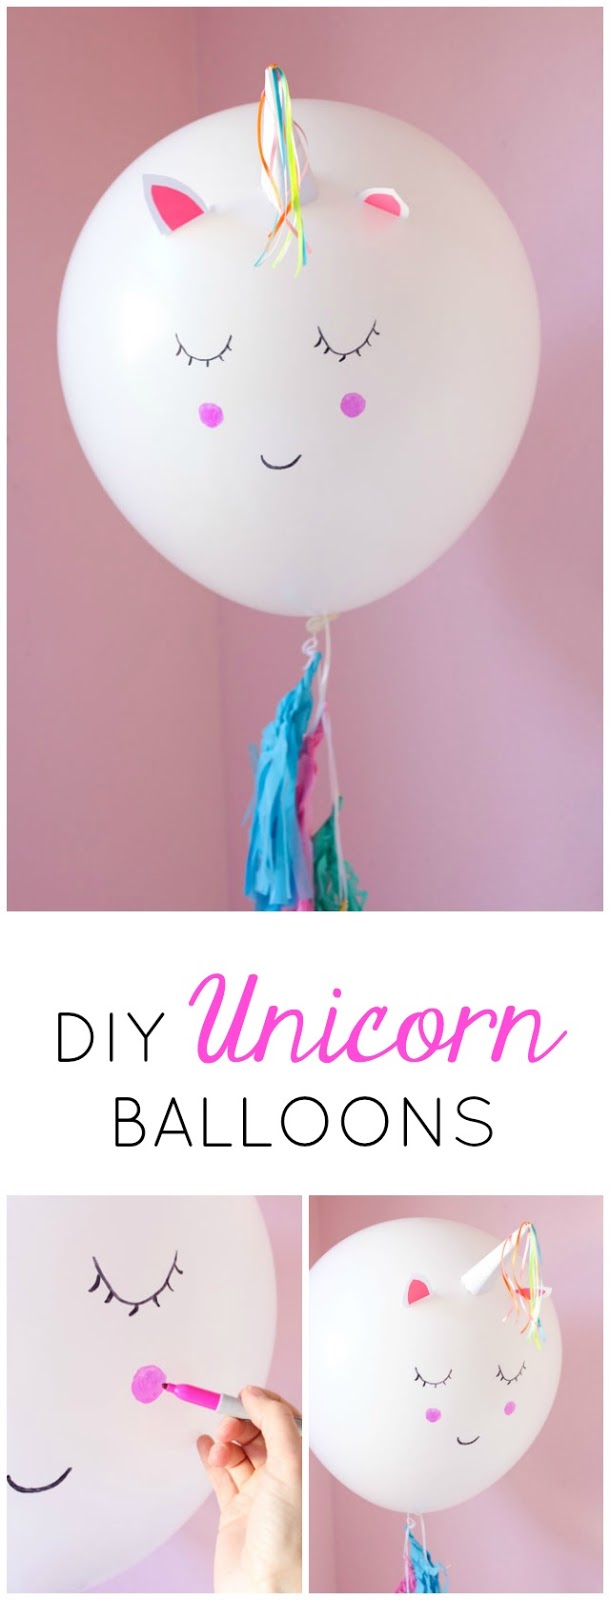 Make these giant DIY unicorn balloons in minutes! Perfect for a unicorn birthday party decoration! #unicorncraft #unicornballoons #unicornparty